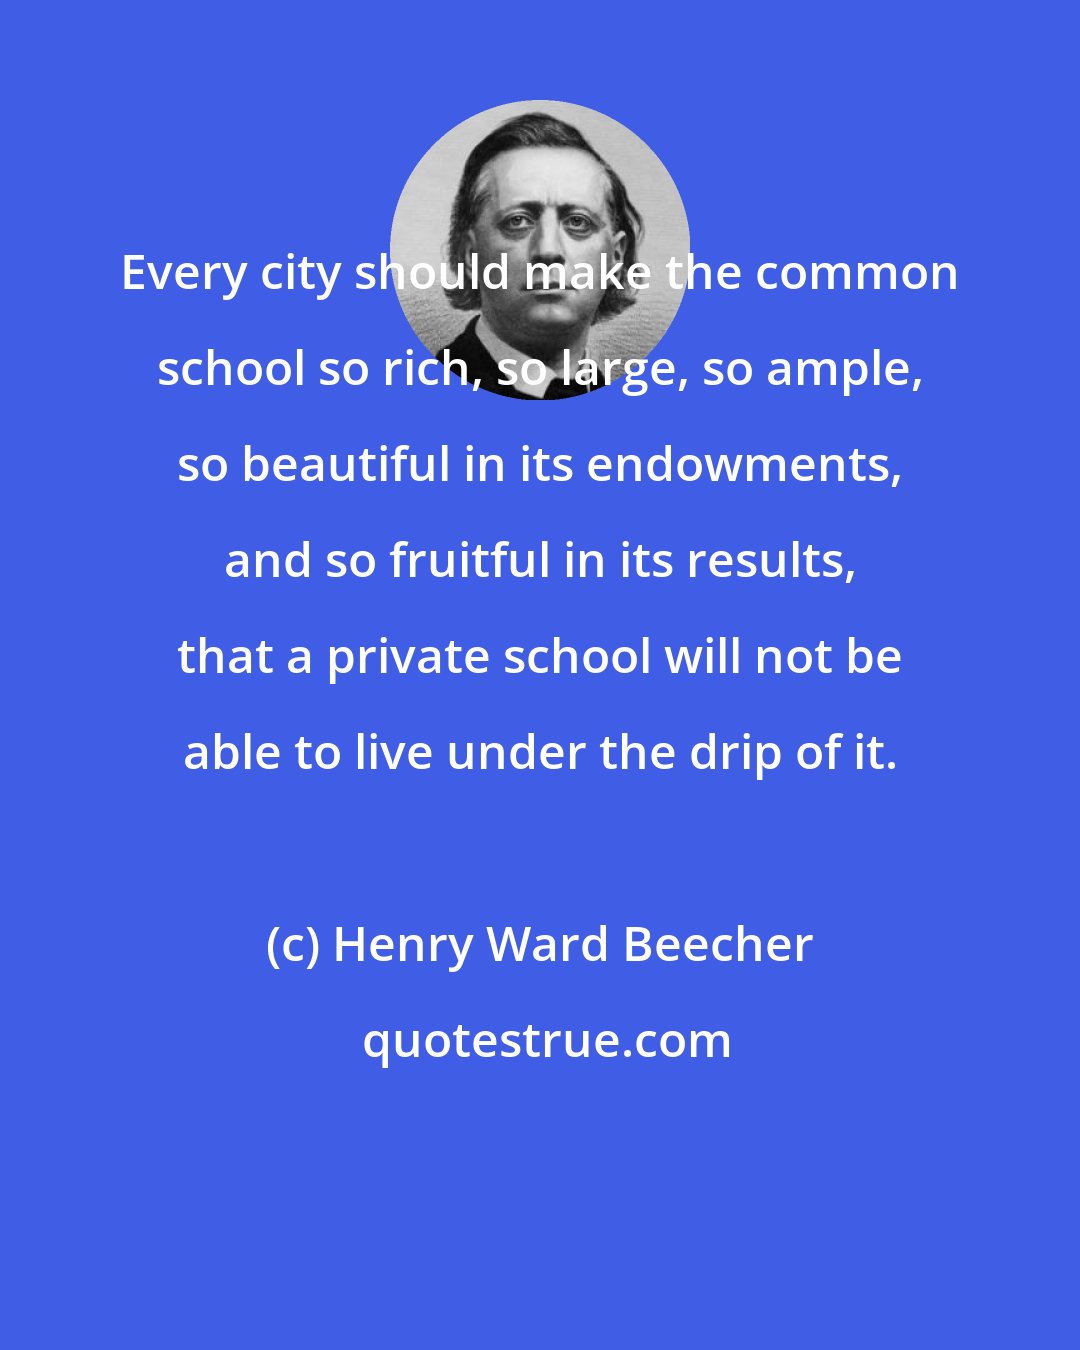 Henry Ward Beecher: Every city should make the common school so rich, so large, so ample, so beautiful in its endowments, and so fruitful in its results, that a private school will not be able to live under the drip of it.